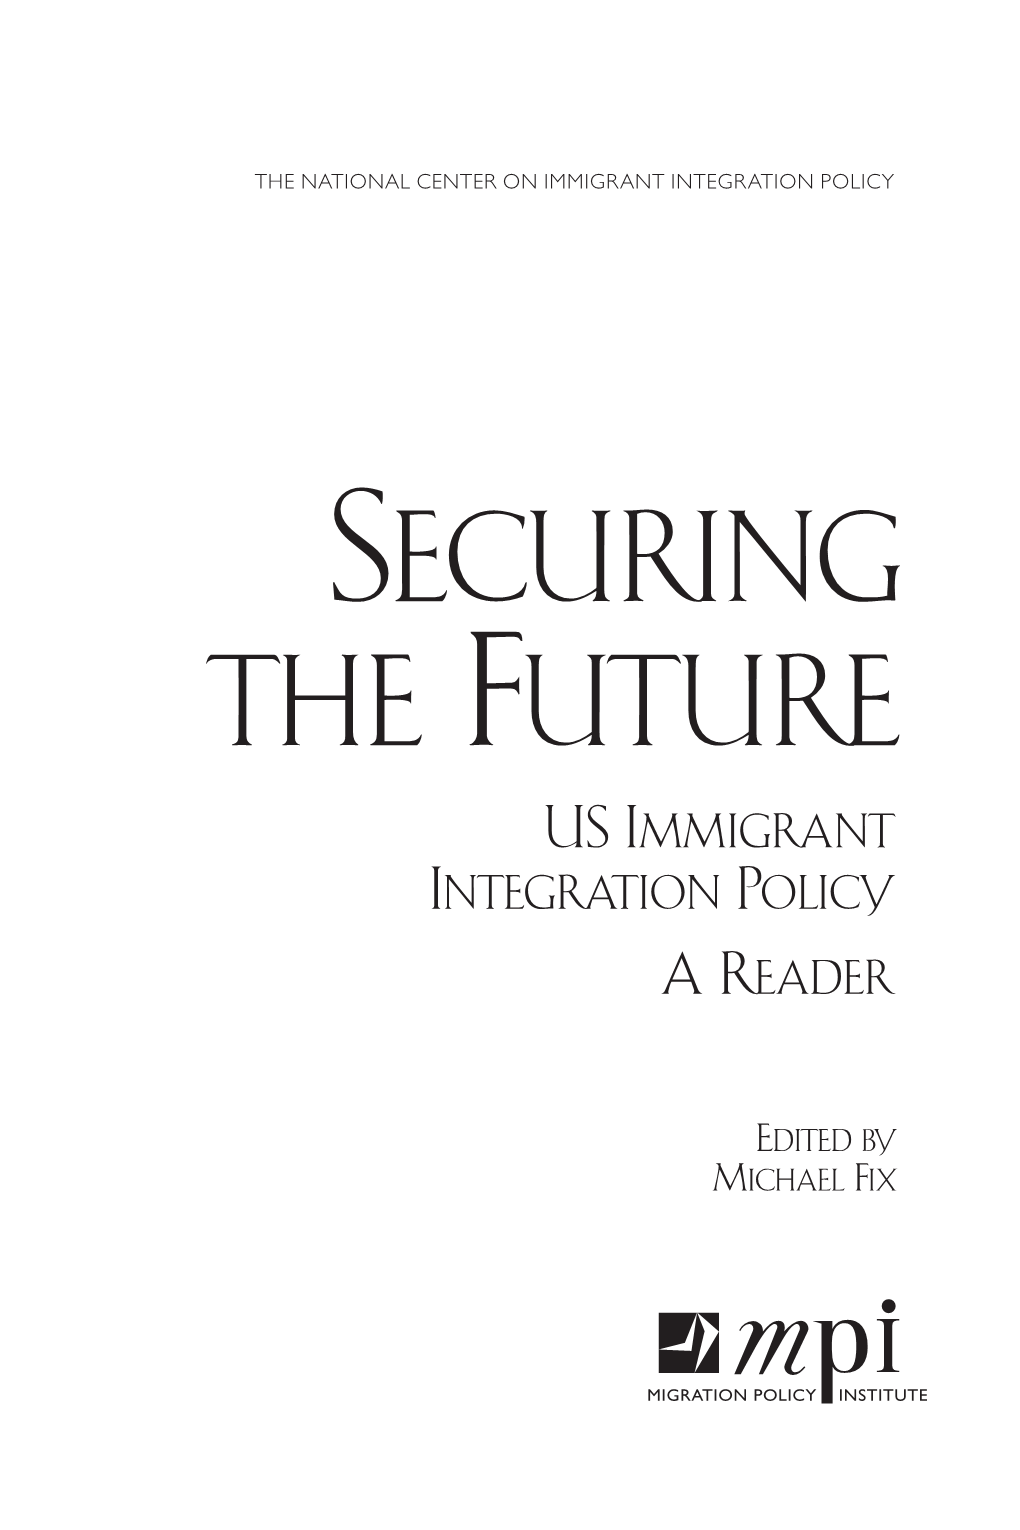 Securing the Future: U.S. Immigrant Integration Policy, a Reader